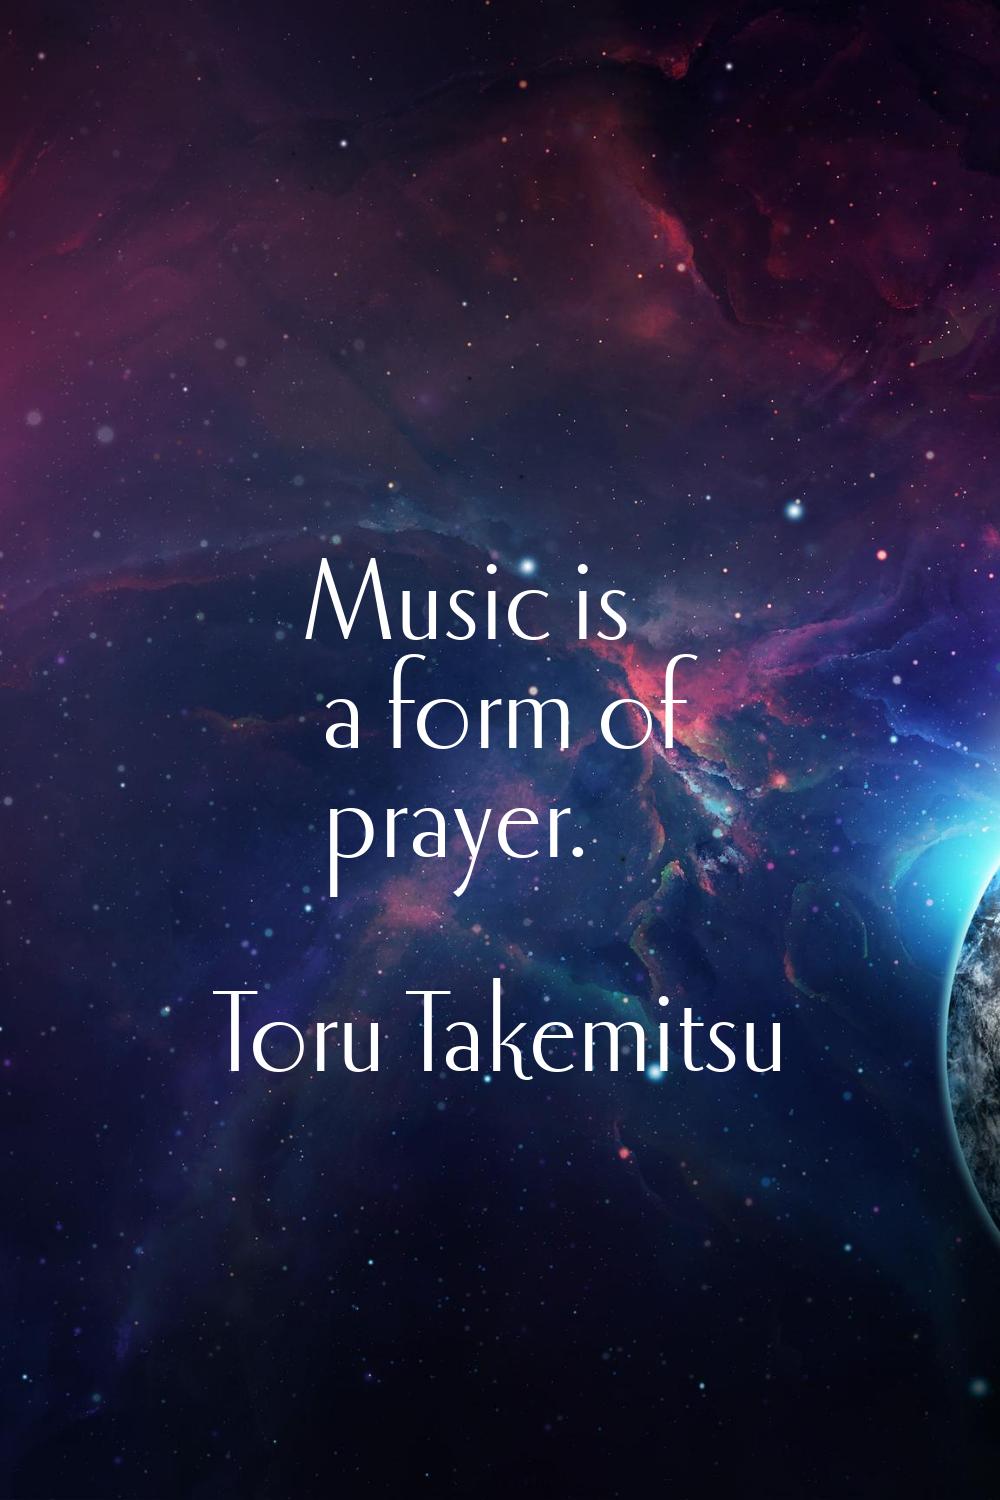 Music is a form of prayer.